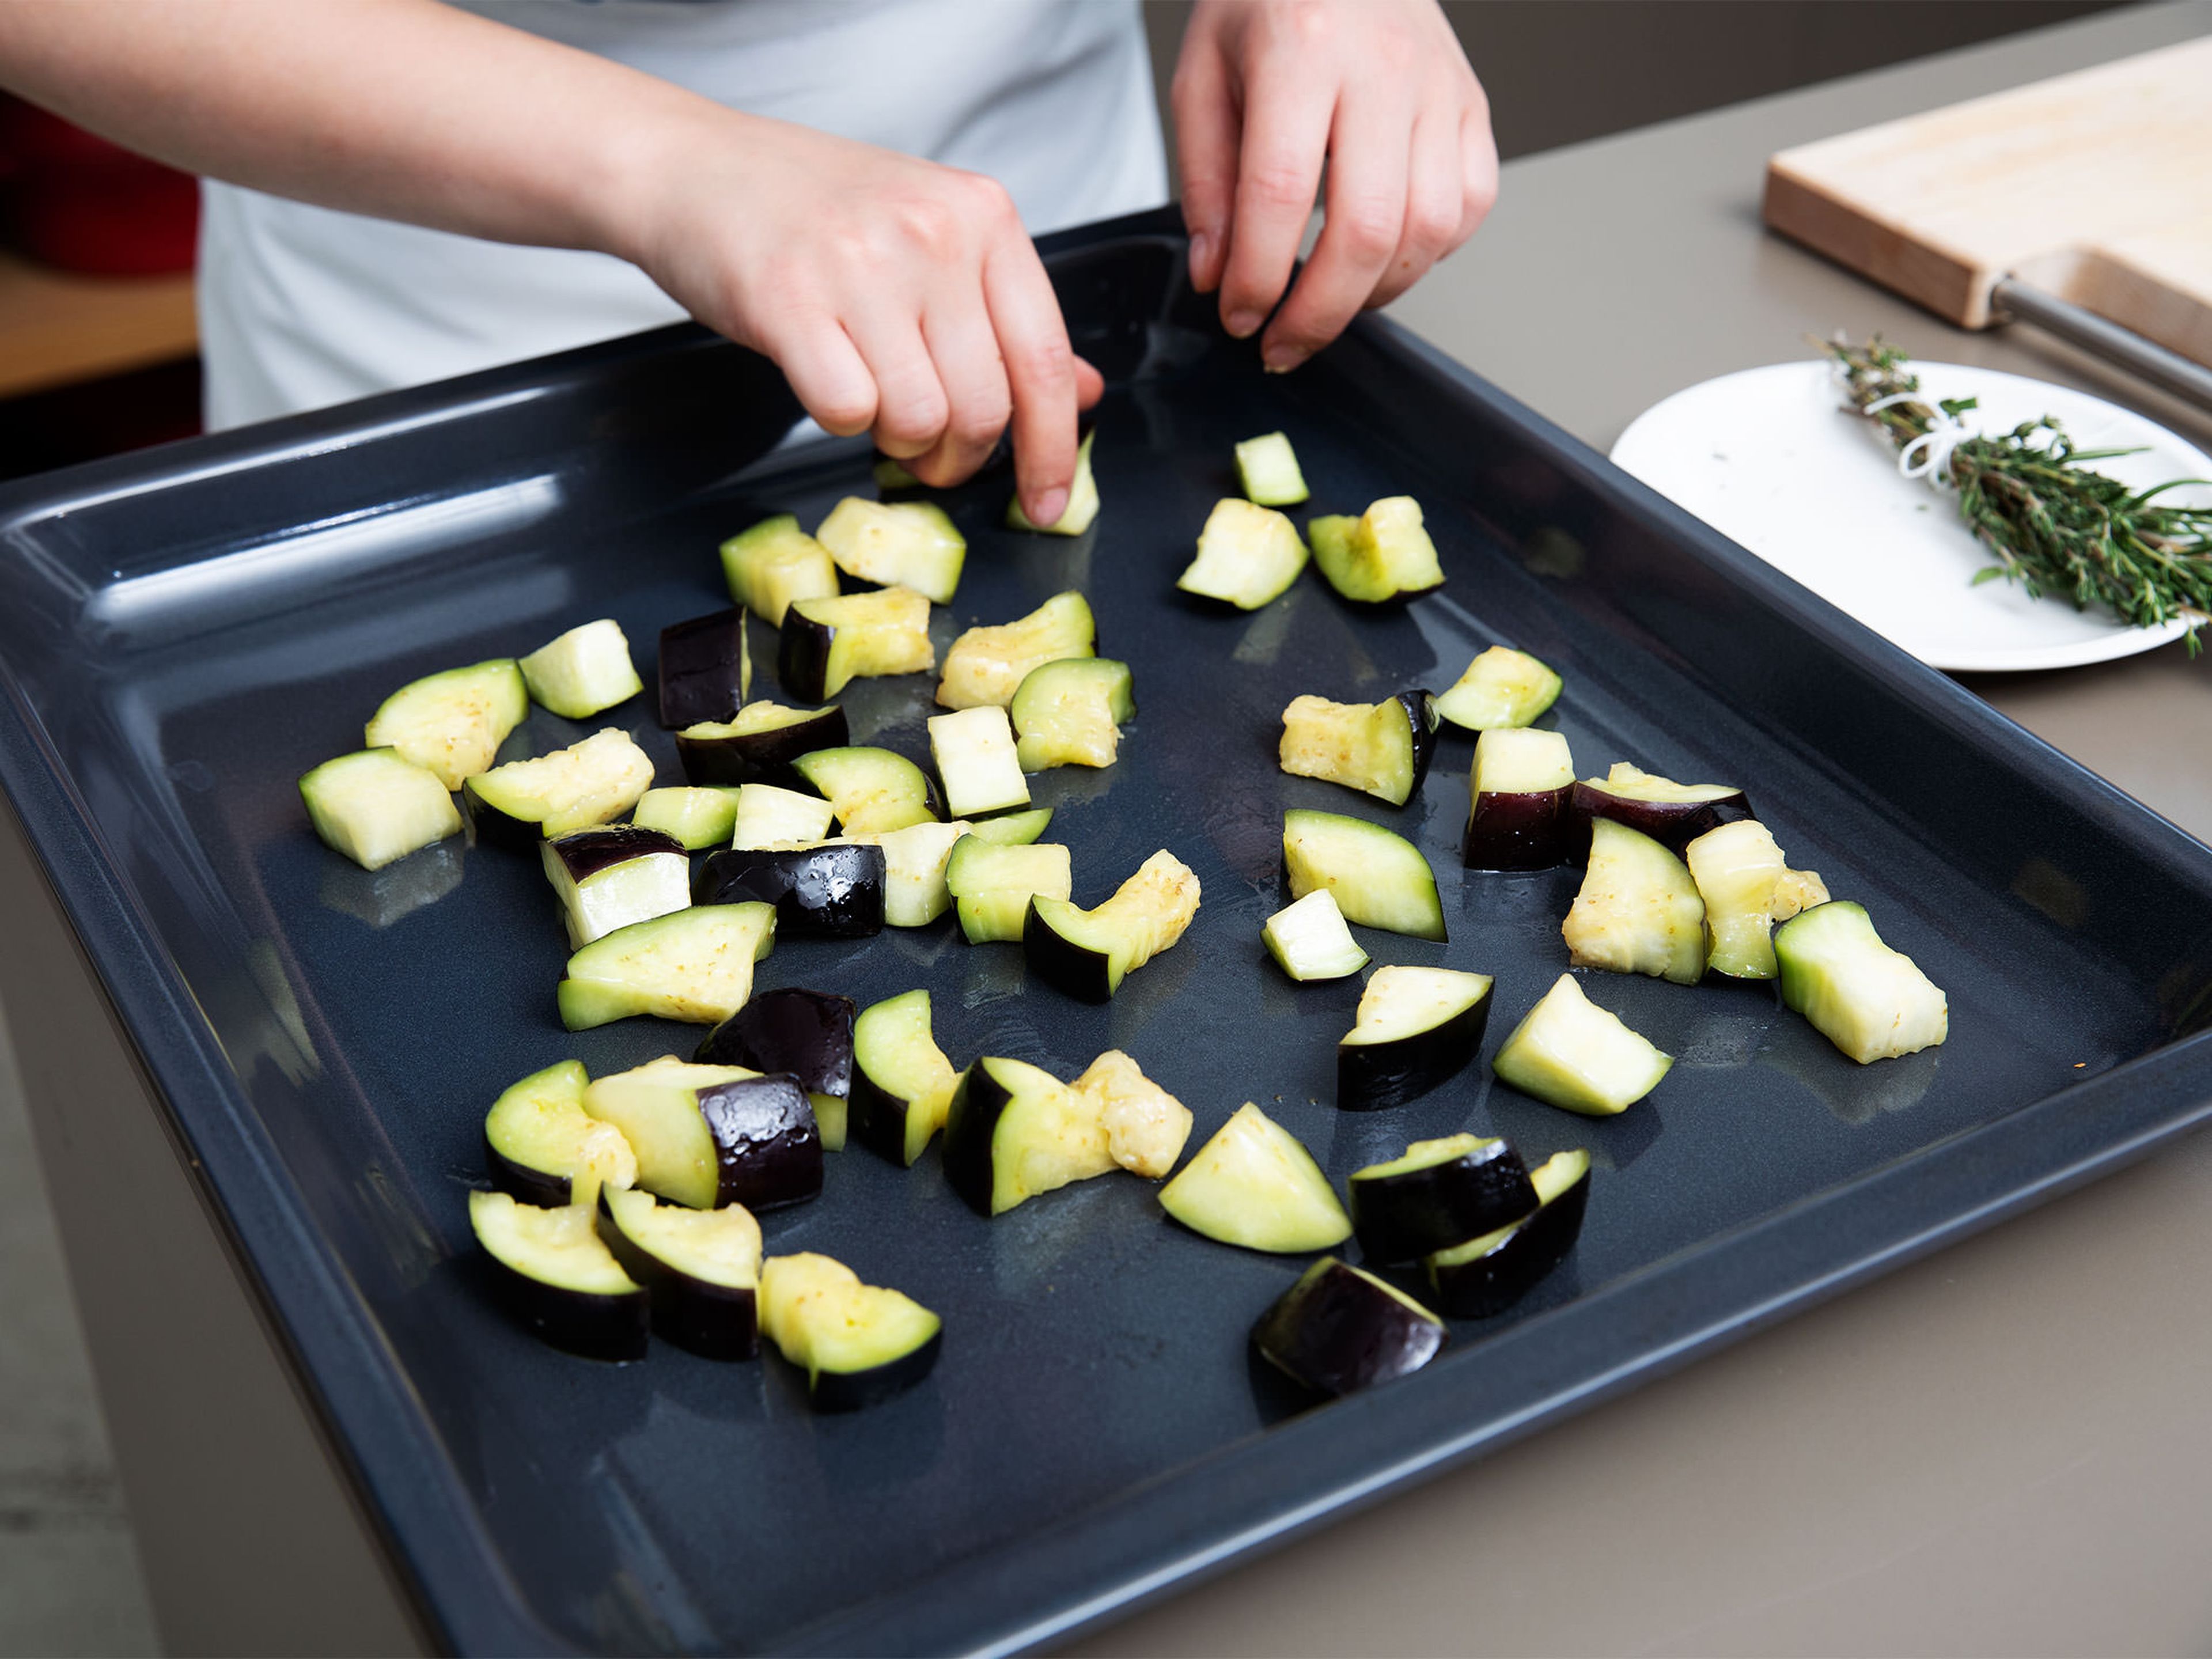 Squeeze out excess water from the eggplant, massage it with a part of the olive oil and spread out onto a parchment-lined baking sheet. Transfer to the oven and let roast for approx. 20 min. at 200°C/390°F.